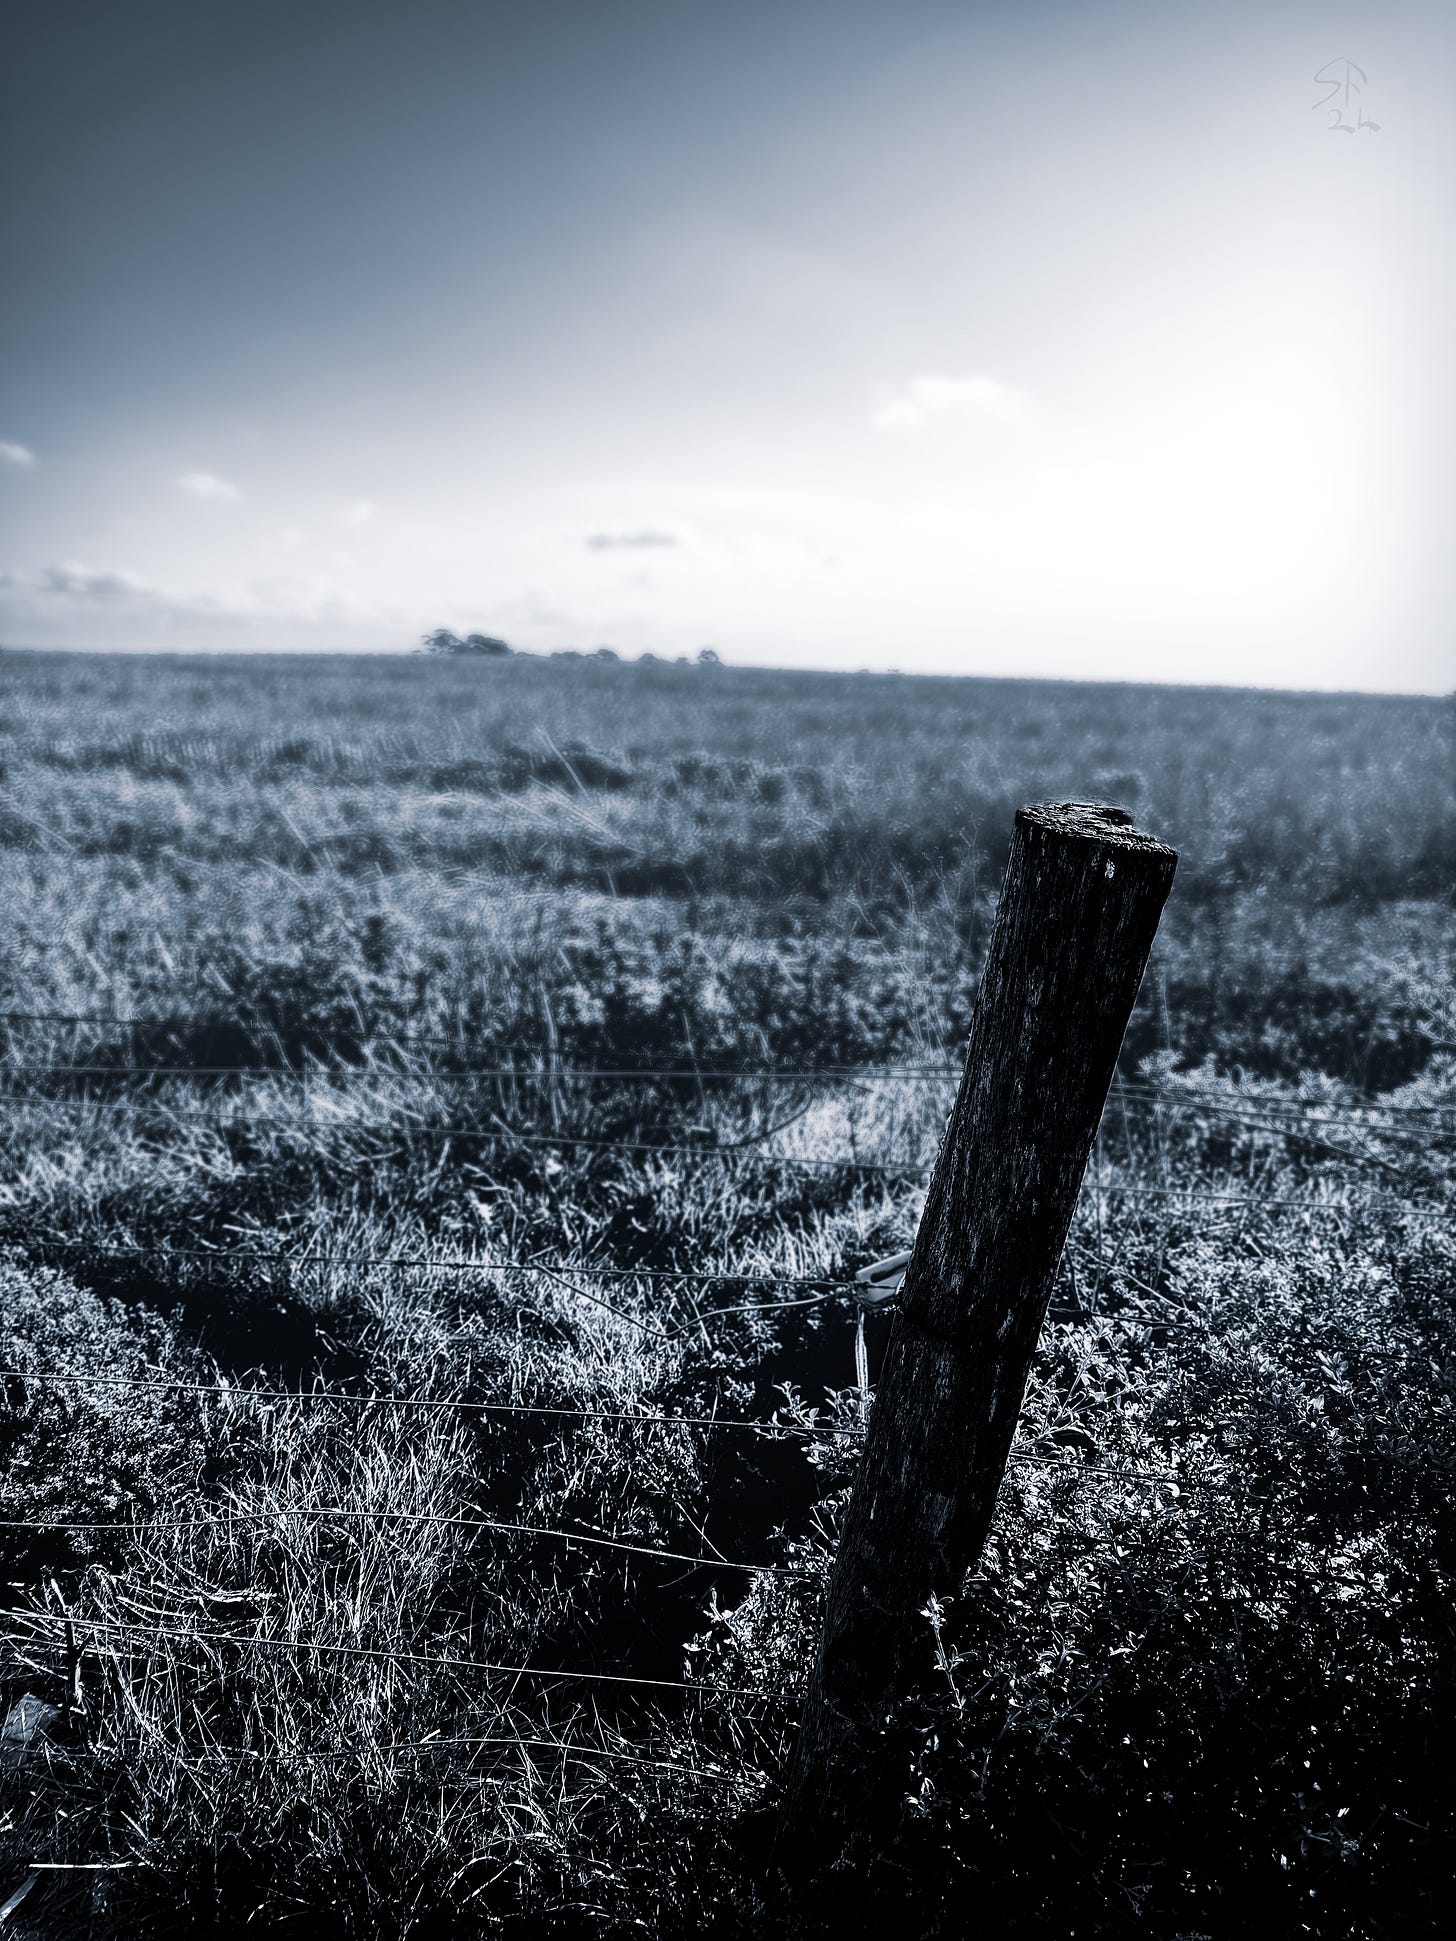 Fence post in the foreground, in focus. Behind, out of focus, a paddock stretching to the horizon.